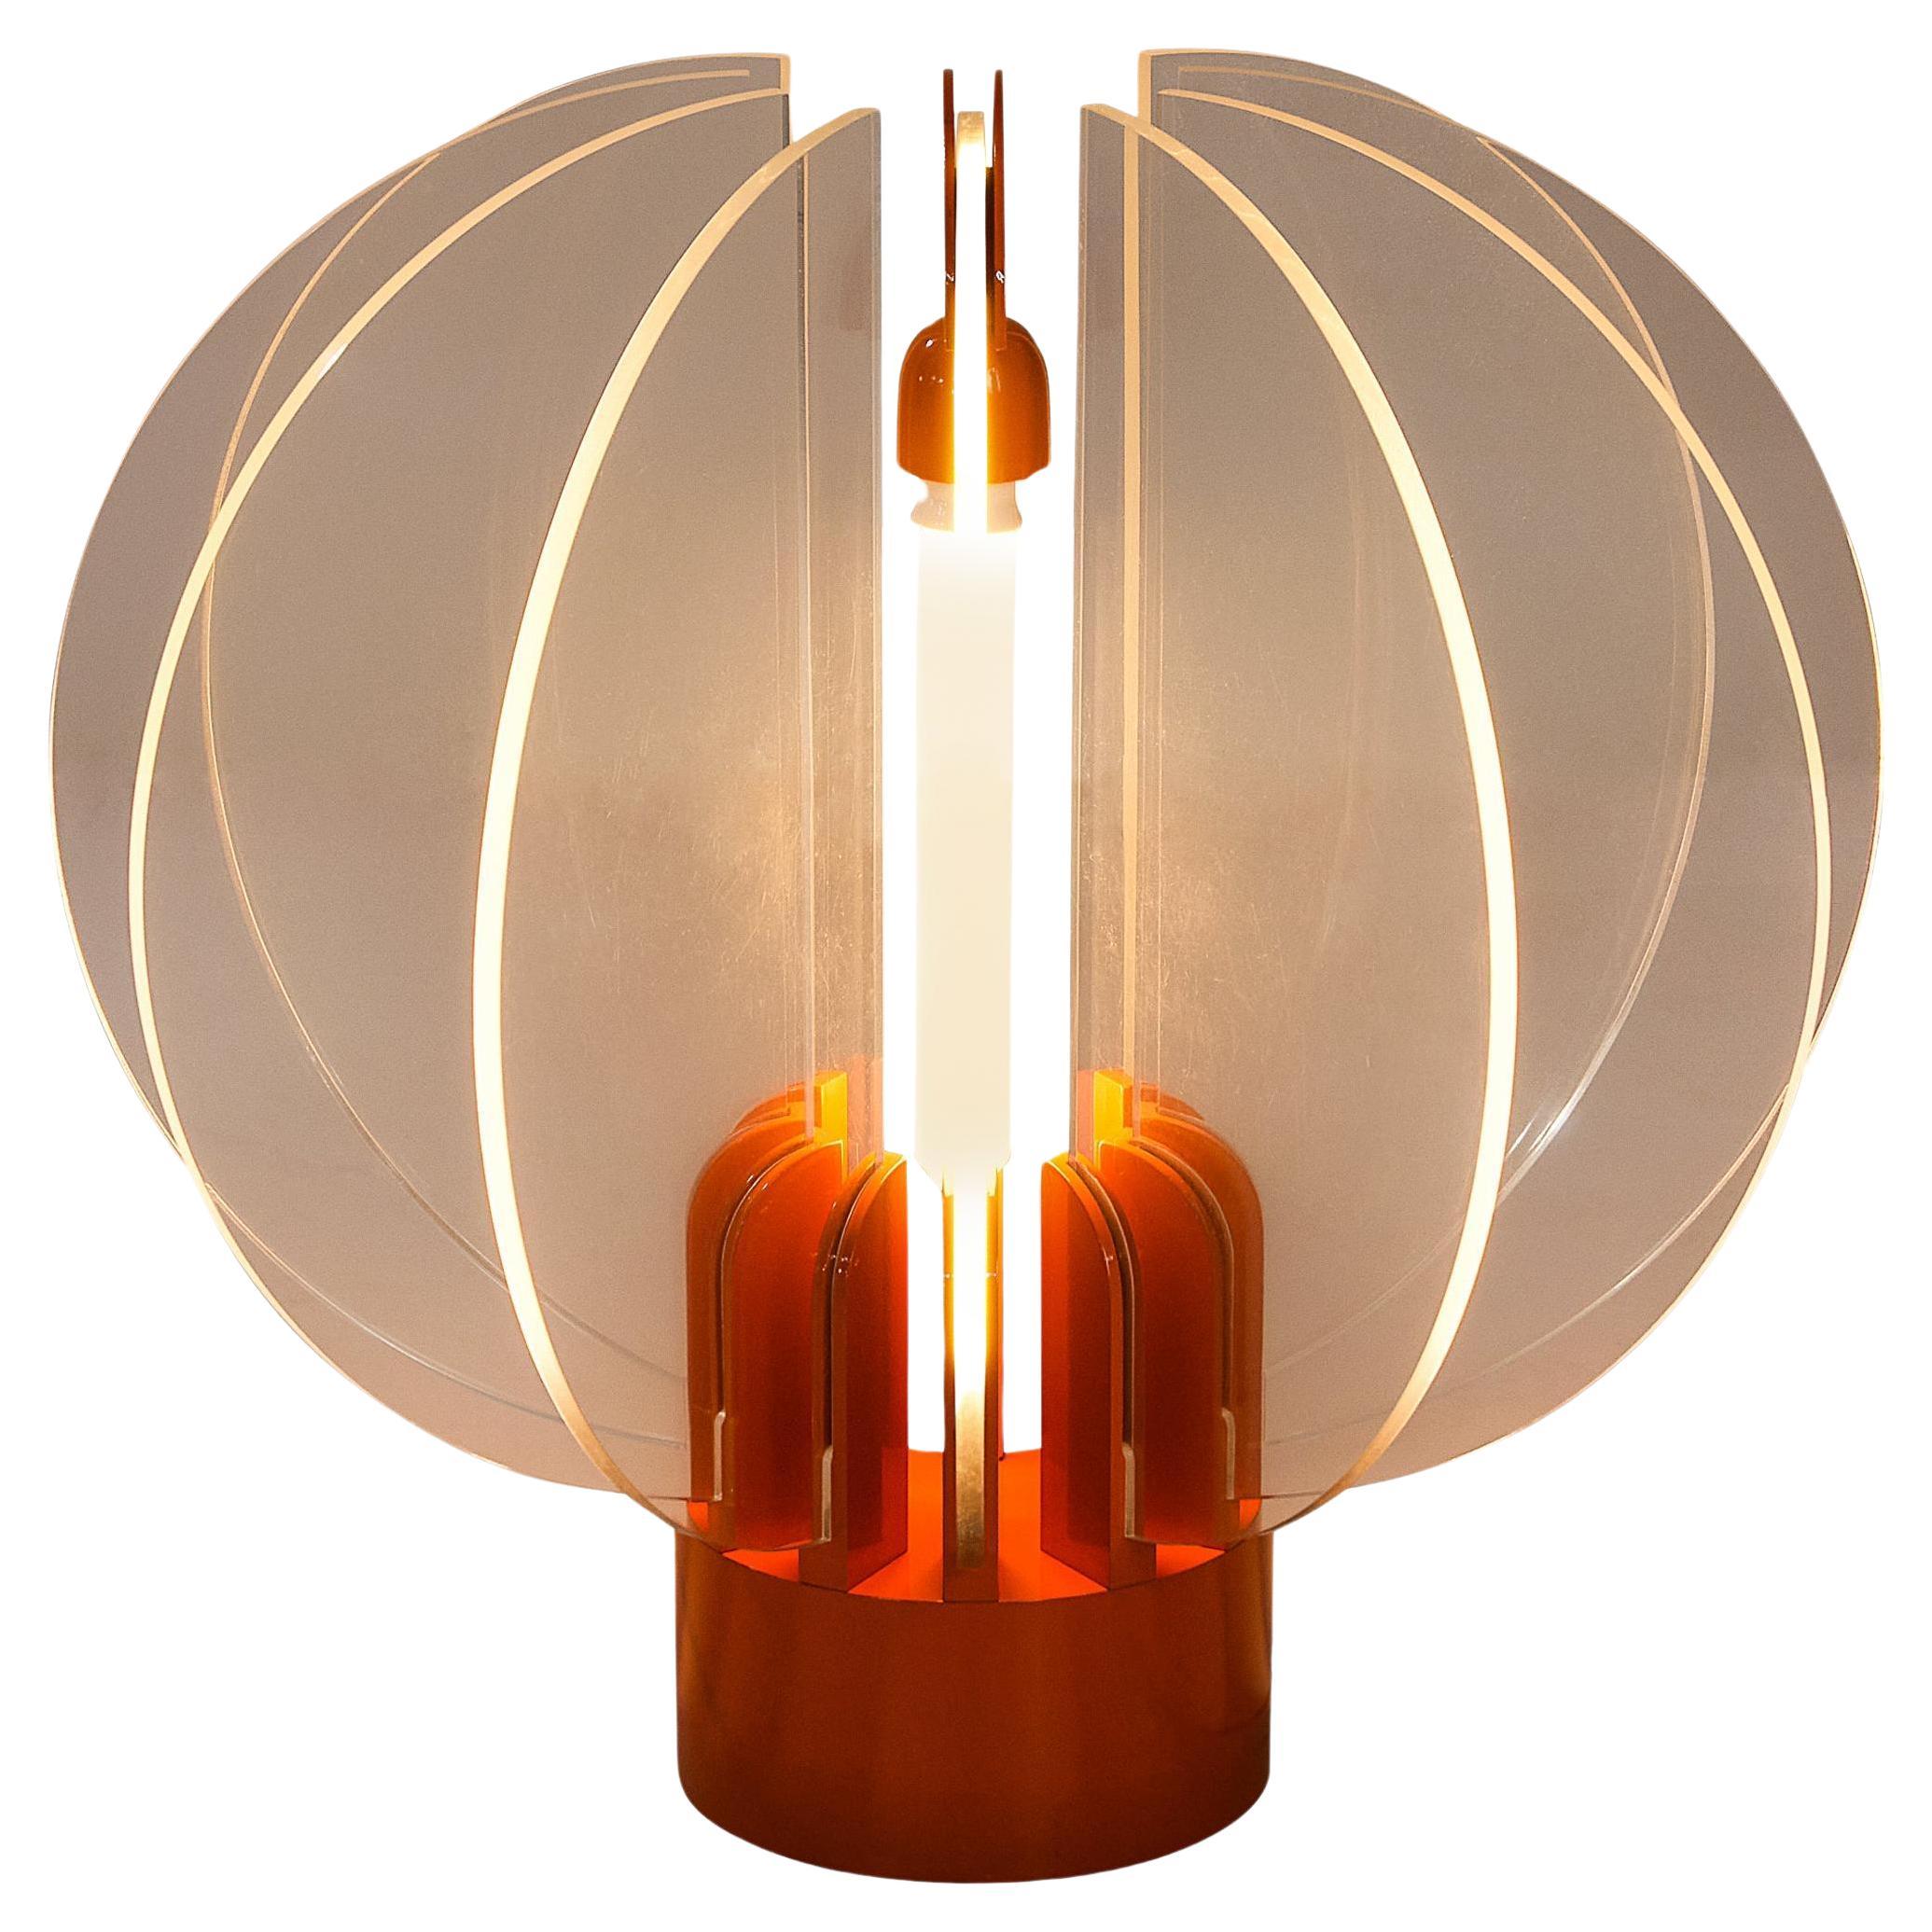 Gae Aulenti for Kartell "KIng Sun" Table Lamp, Italy 1970s For Sale